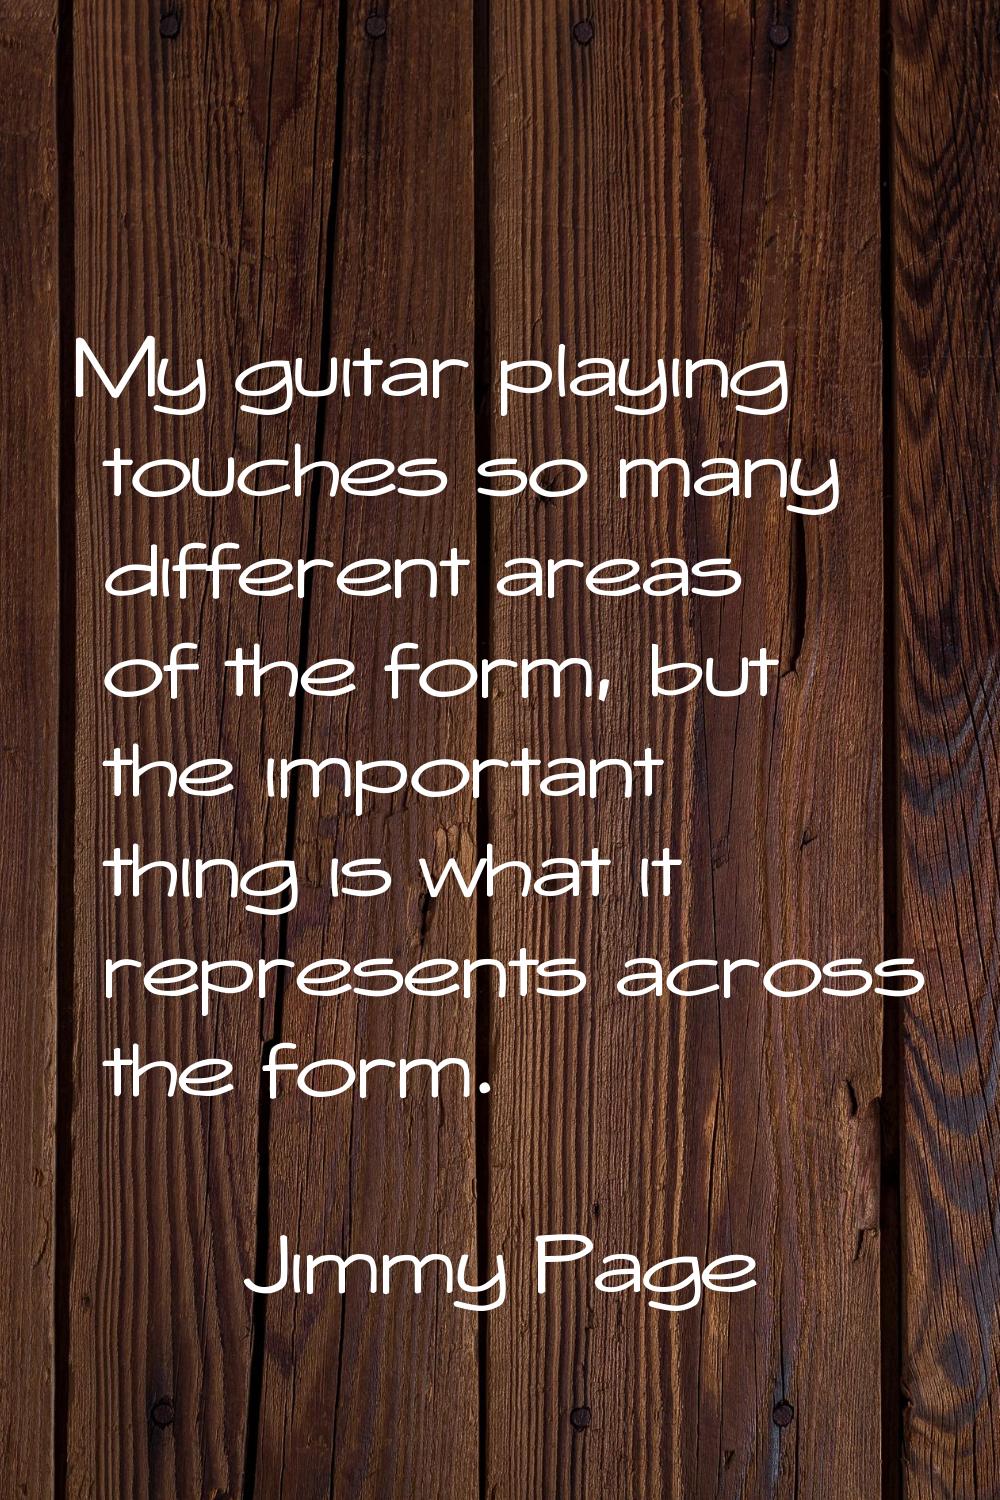 My guitar playing touches so many different areas of the form, but the important thing is what it r